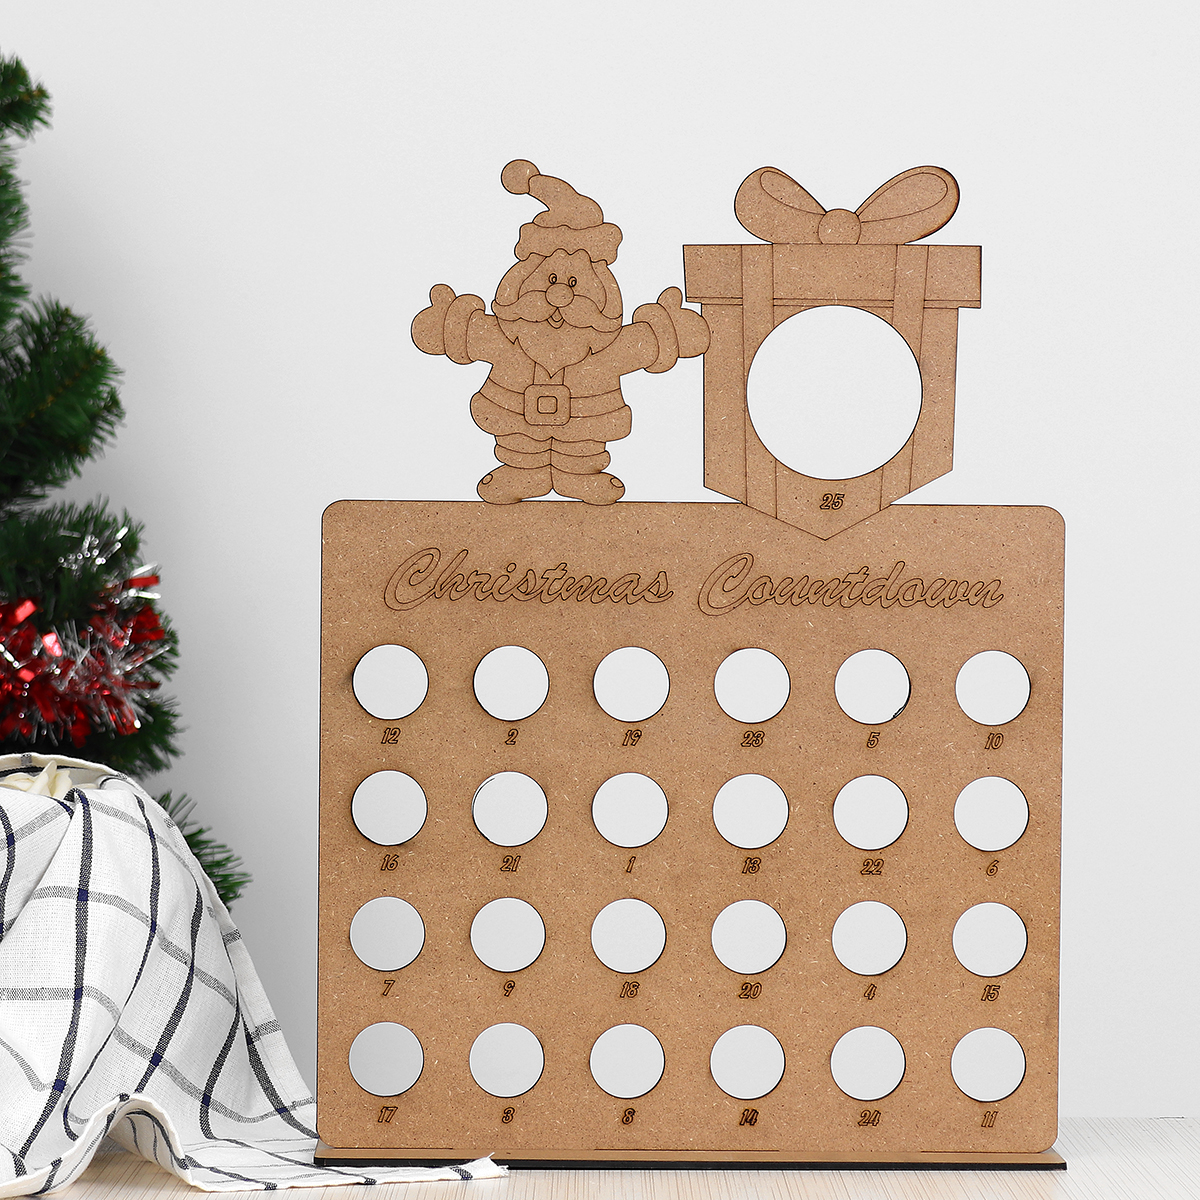 Wooden-Christmas-Advent-Calendar-Christmas-Claus-Decoration-Fits-25-Circular-Chocolates-Candy-Stand--1587875-3